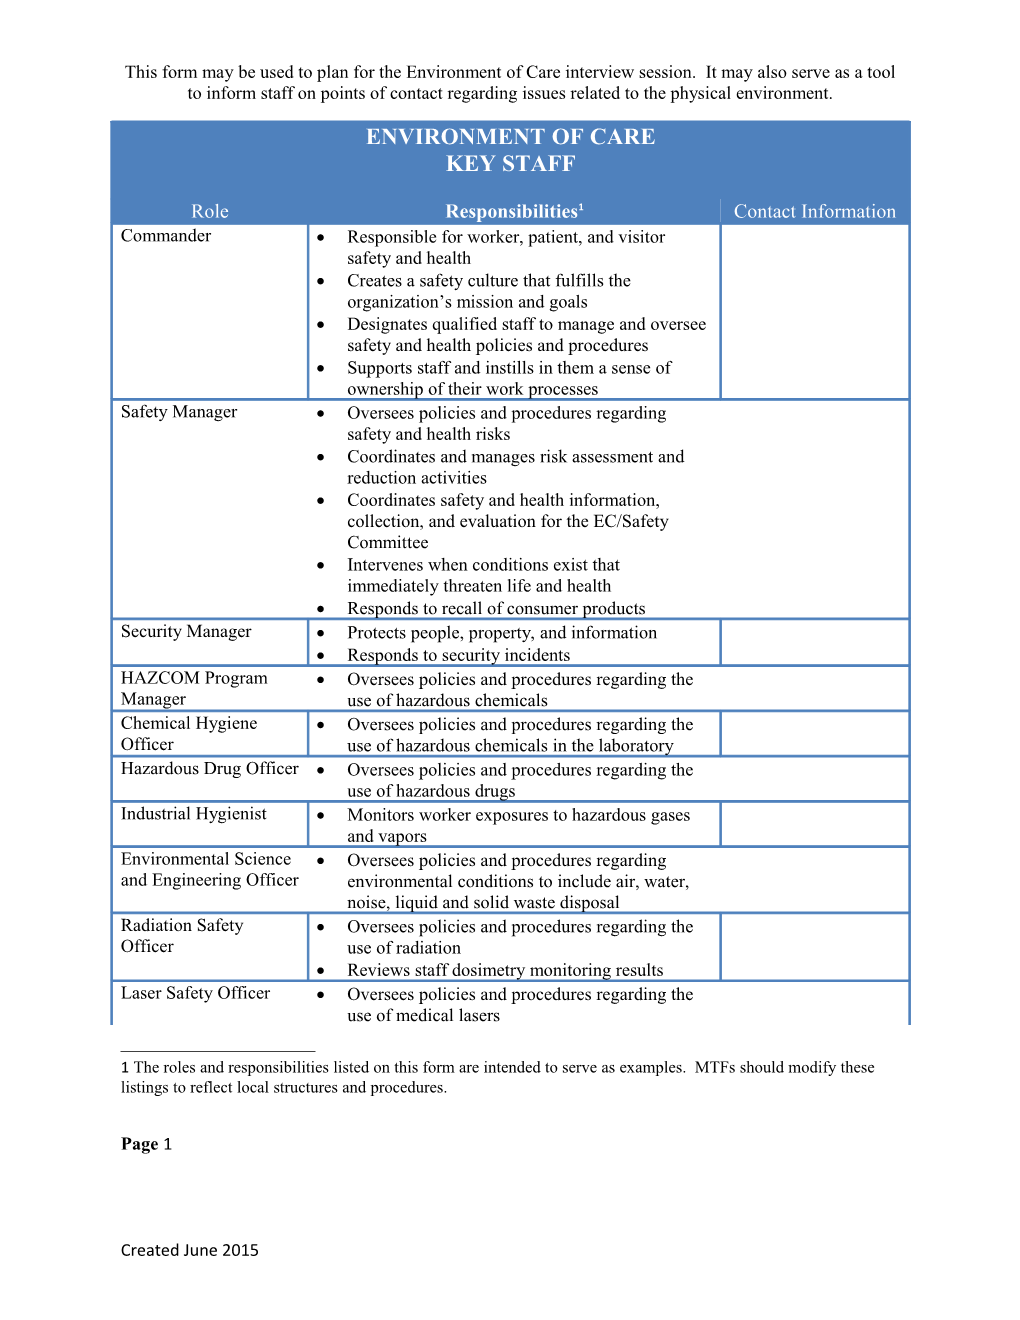 Medical Safety Template - Environment of Care Key Staff